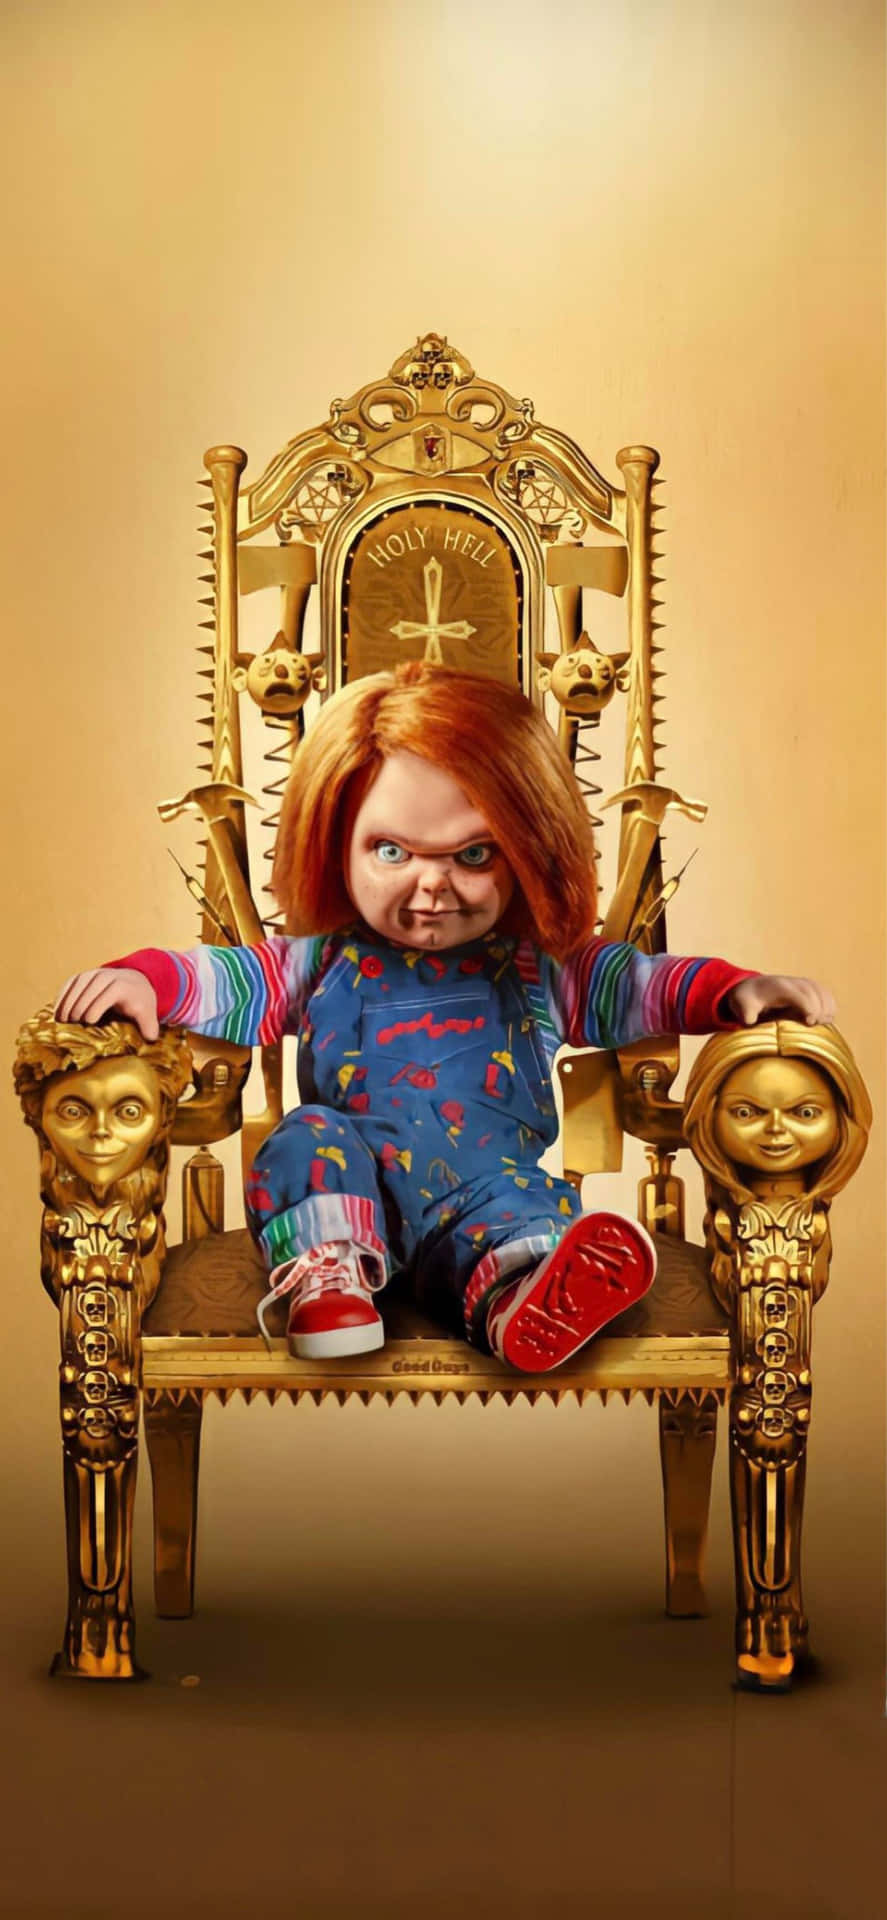 "The Notorious Chucky - He Who Must Not Be Named"